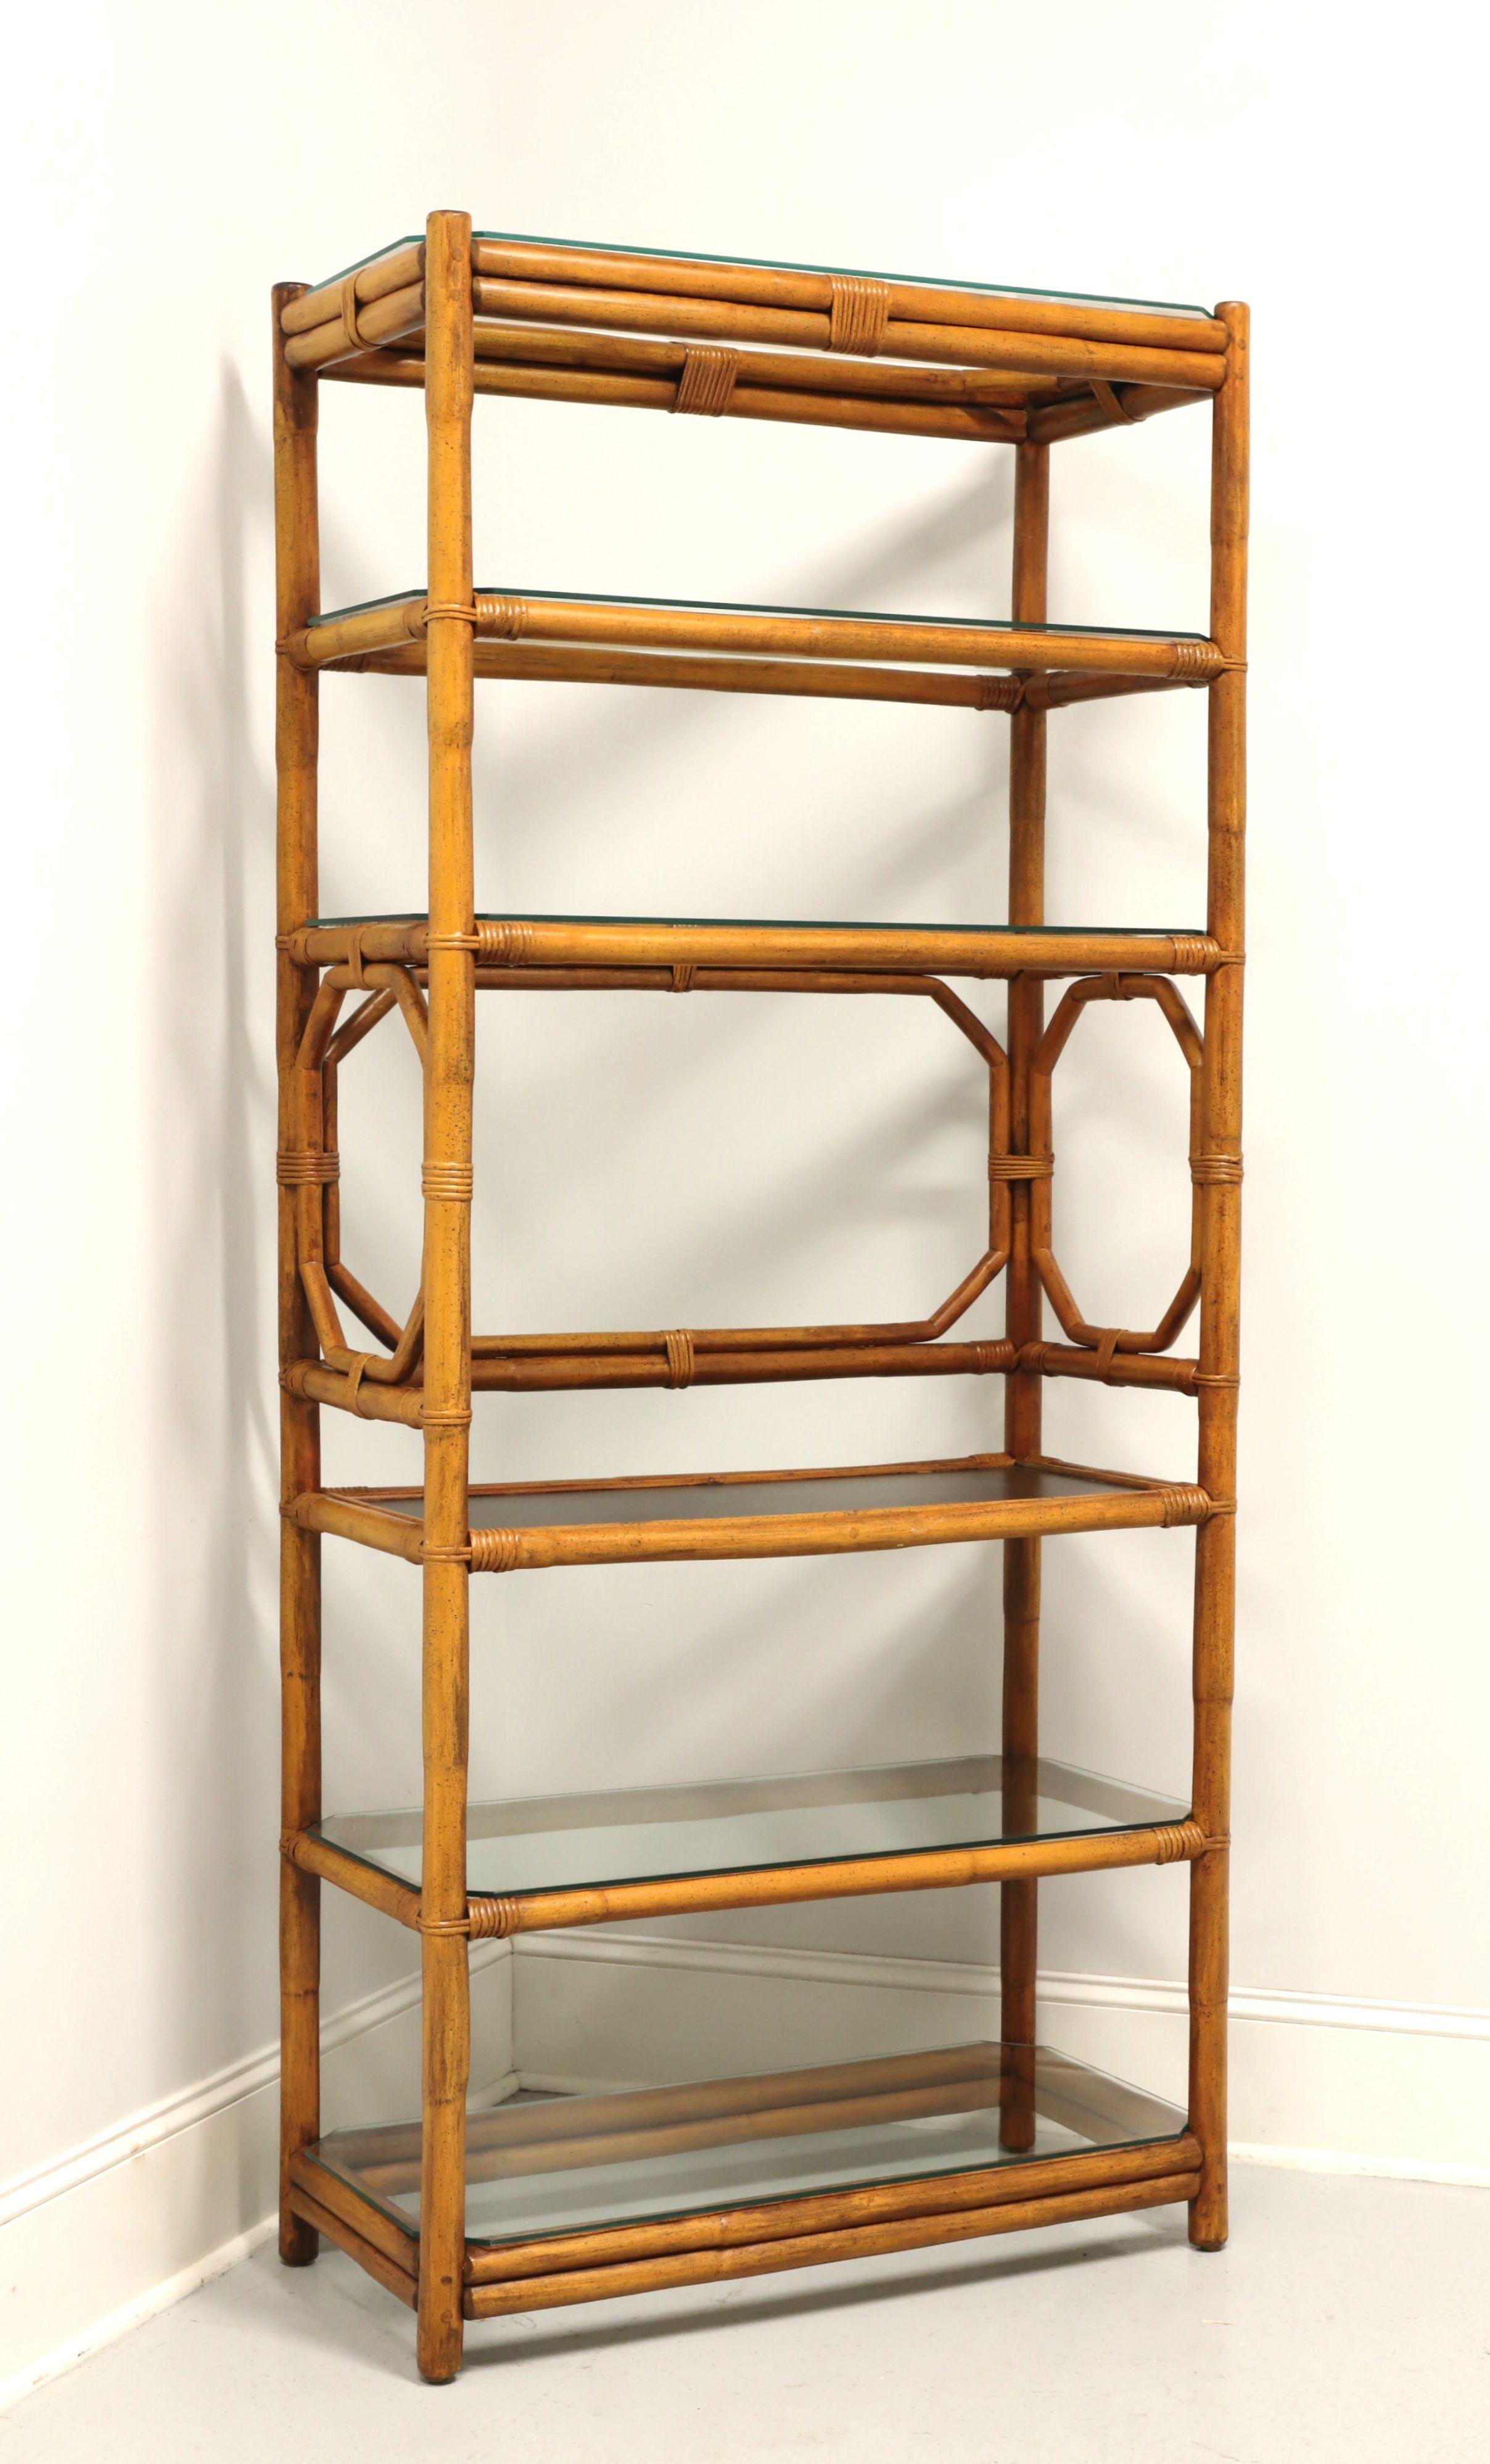 FICKS REED Mid 20th Century Faux Bamboo Rattan Etagere Display Shelving Unit 3